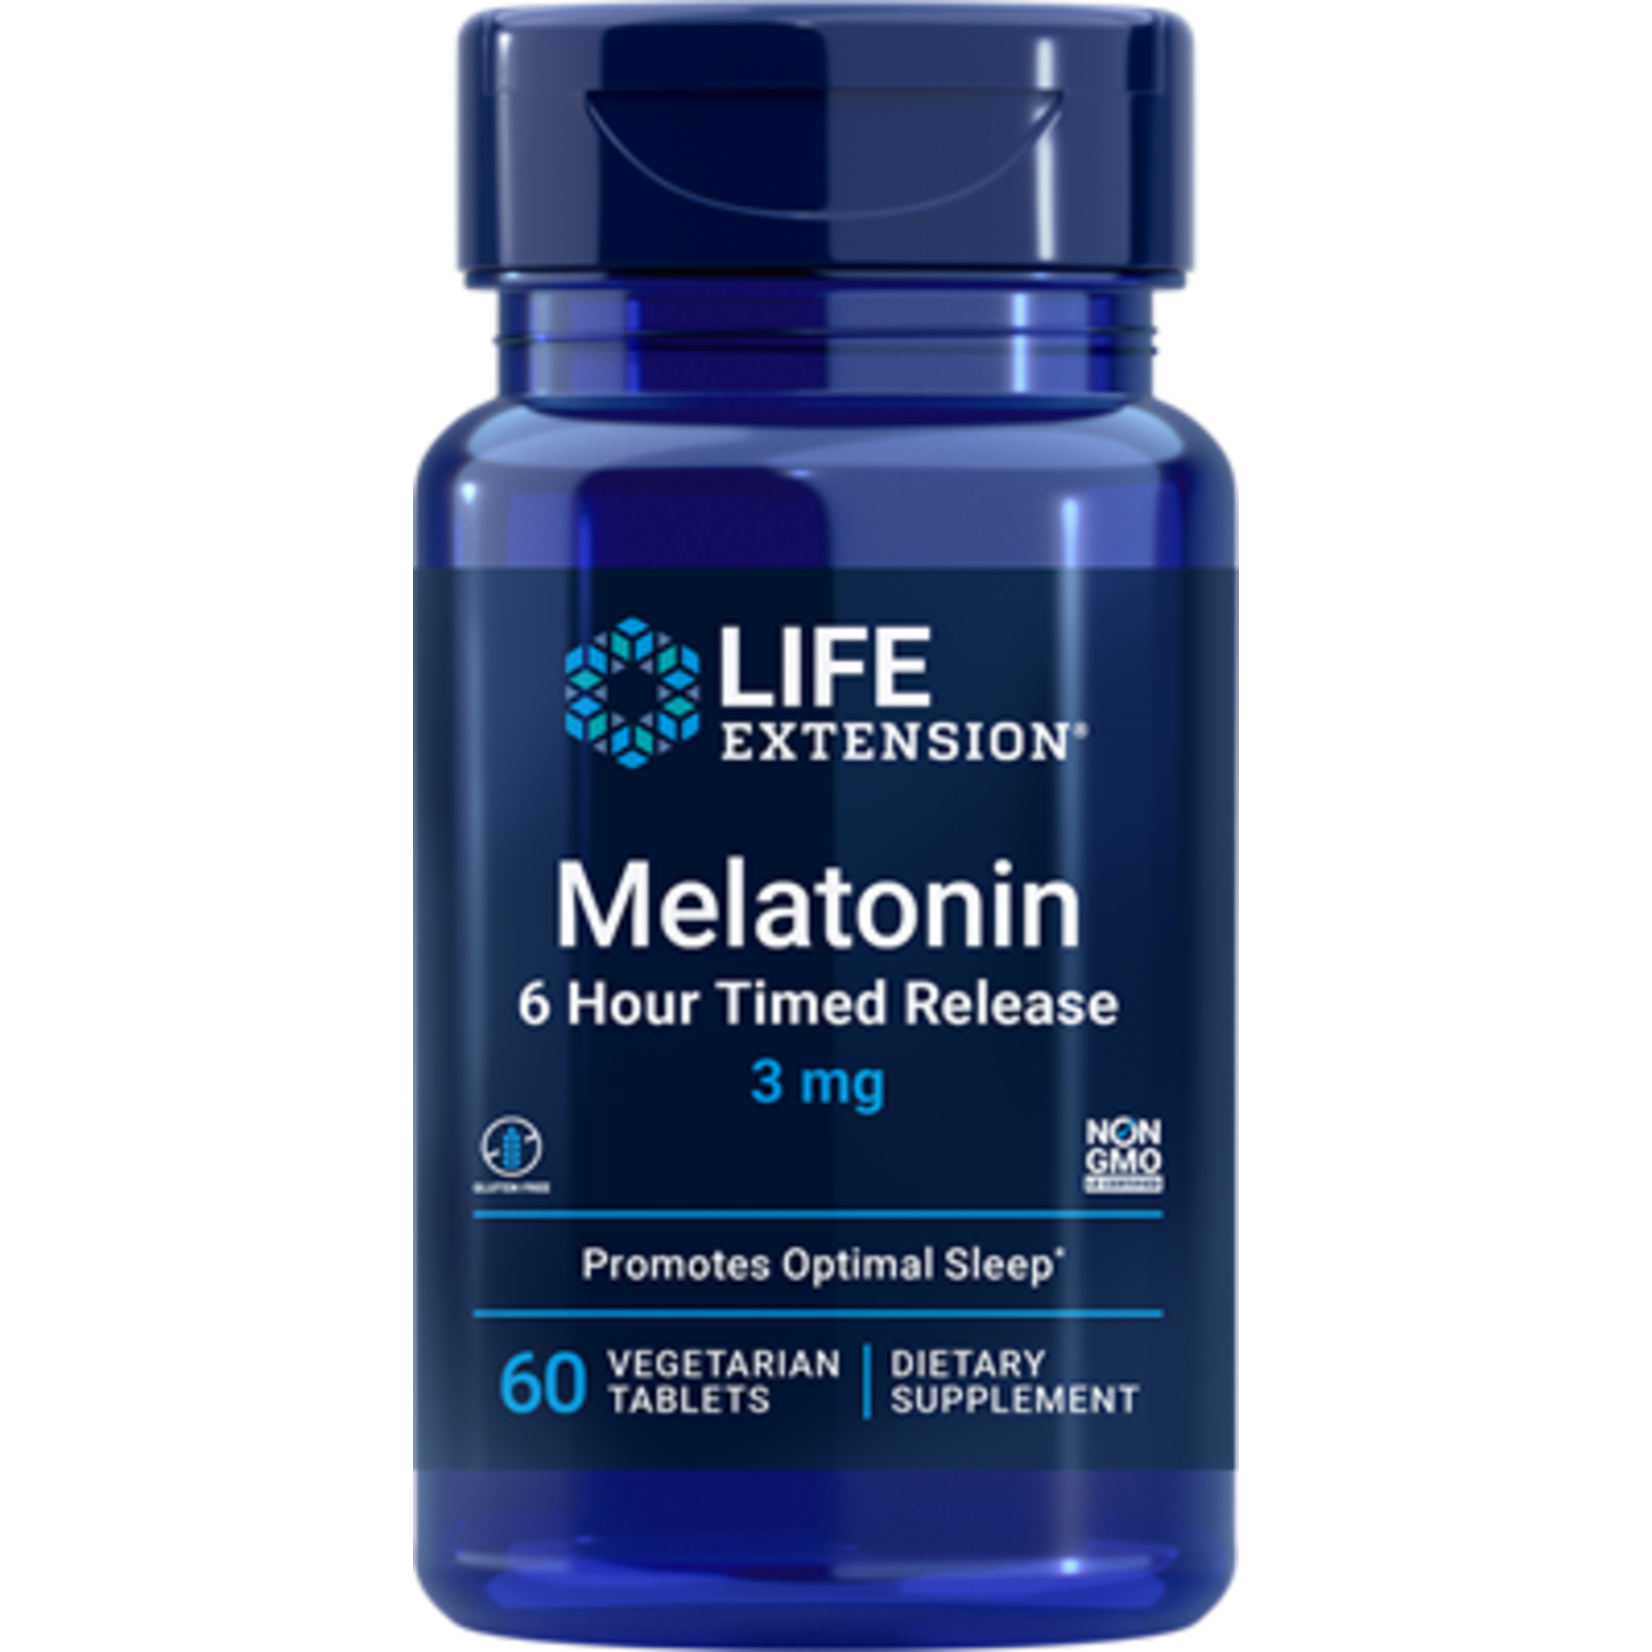 Life Extension Life Extension - Melatonin 6 Hour Timed Release 750 mcg - 60 Tablets